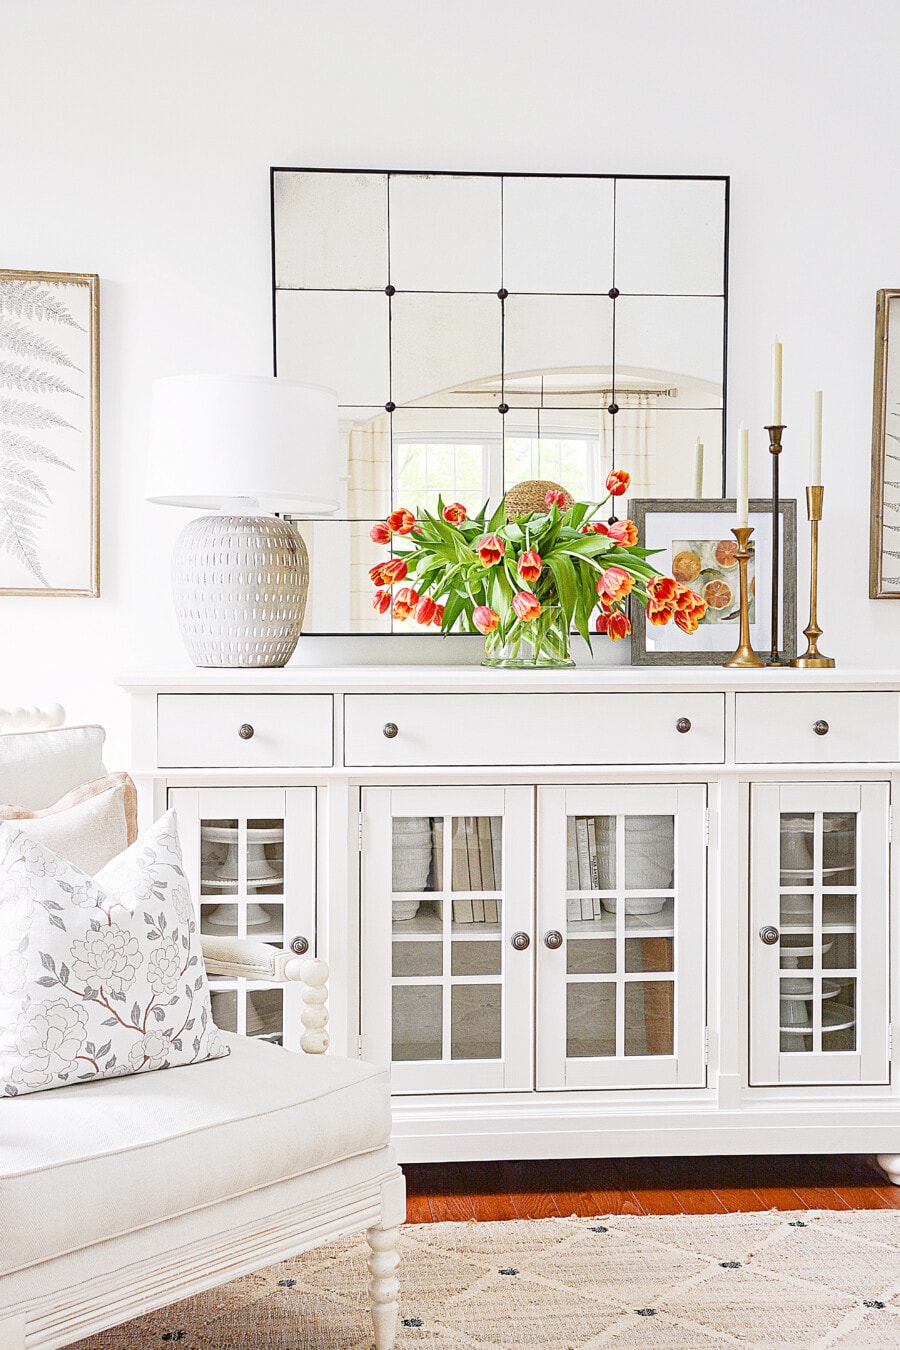 How To Decorate A Buffet Sideboard